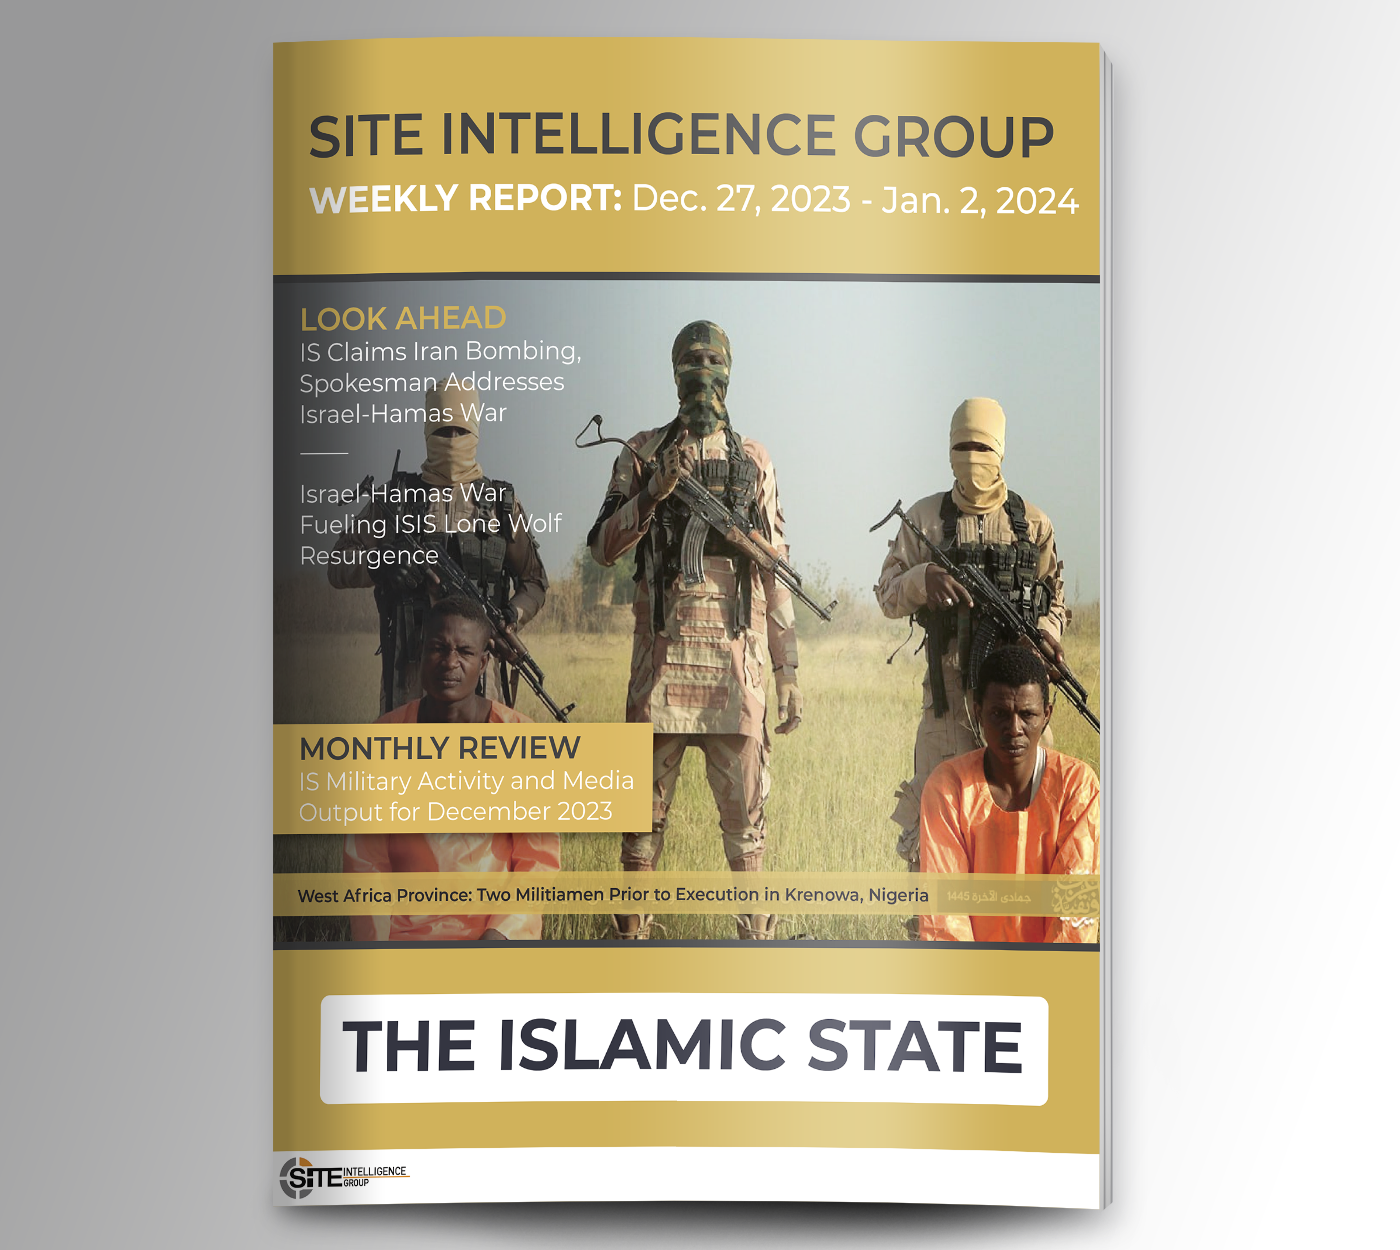 Weekly inSITE on the Islamic State for December 27, 2023-January 2, 2024